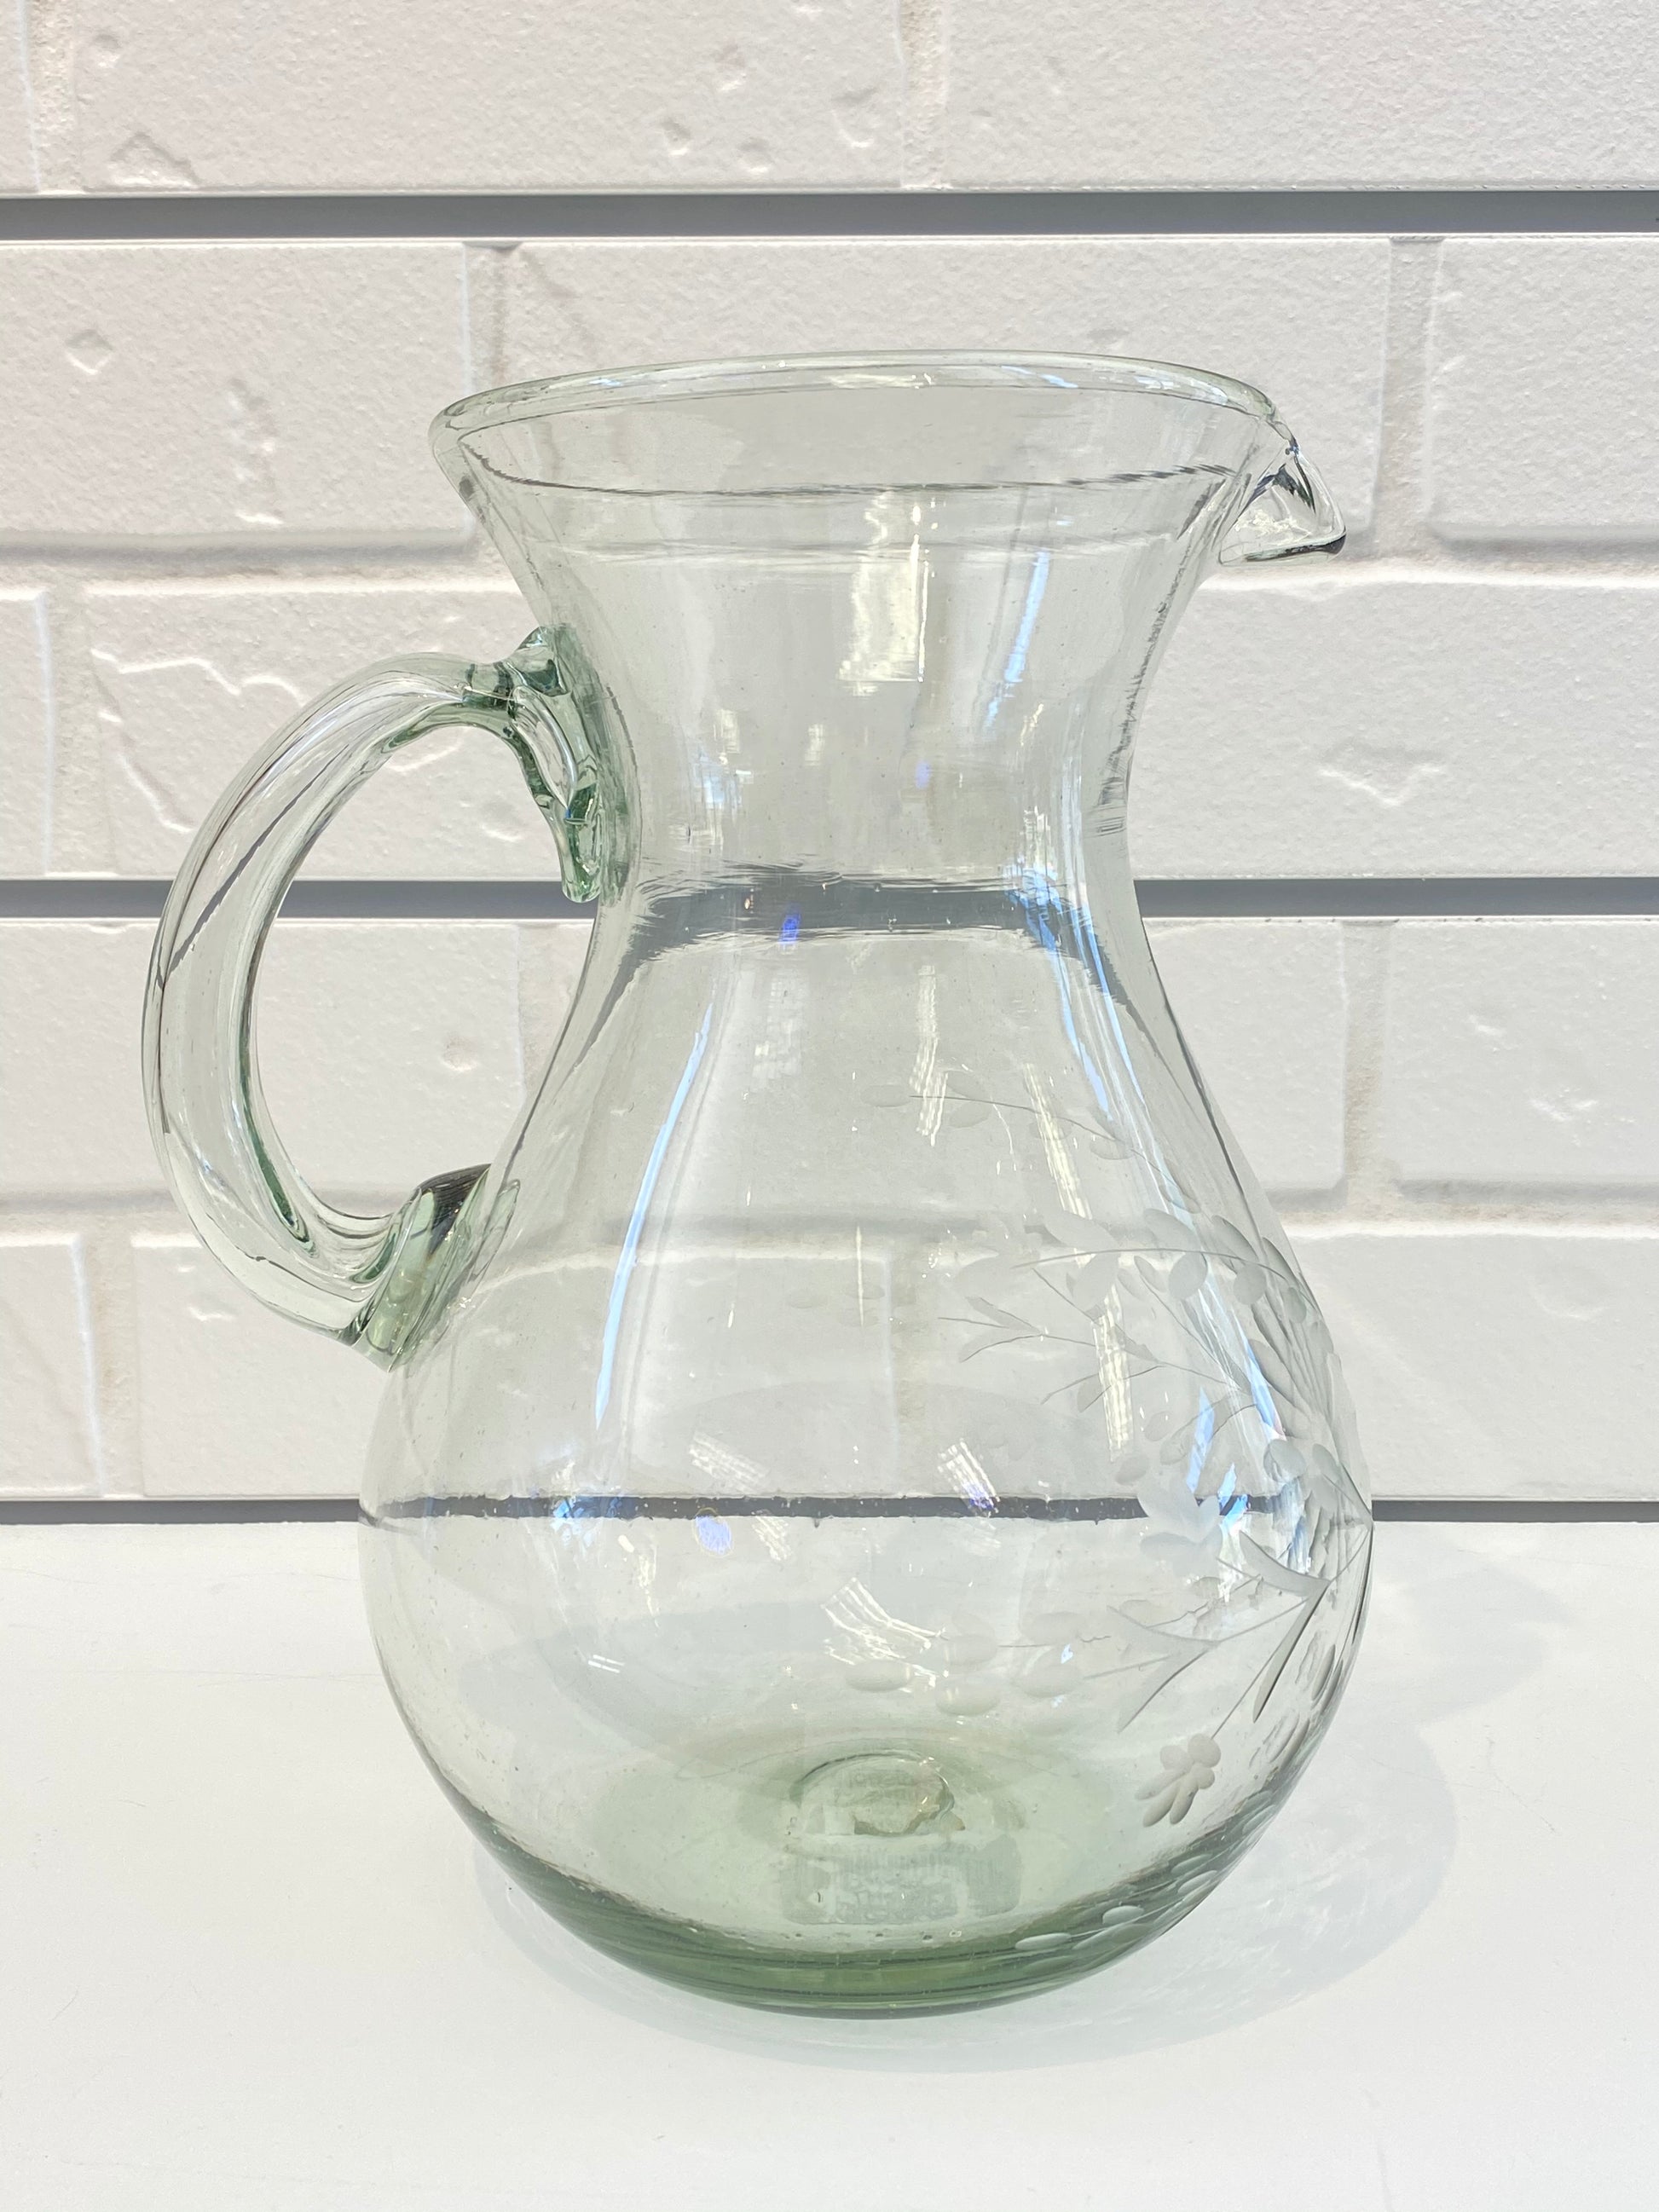 Mexico Condessa Pear-Shaped Glass Pitcher - Clear Pitchers Rose Ann Hall Designs   